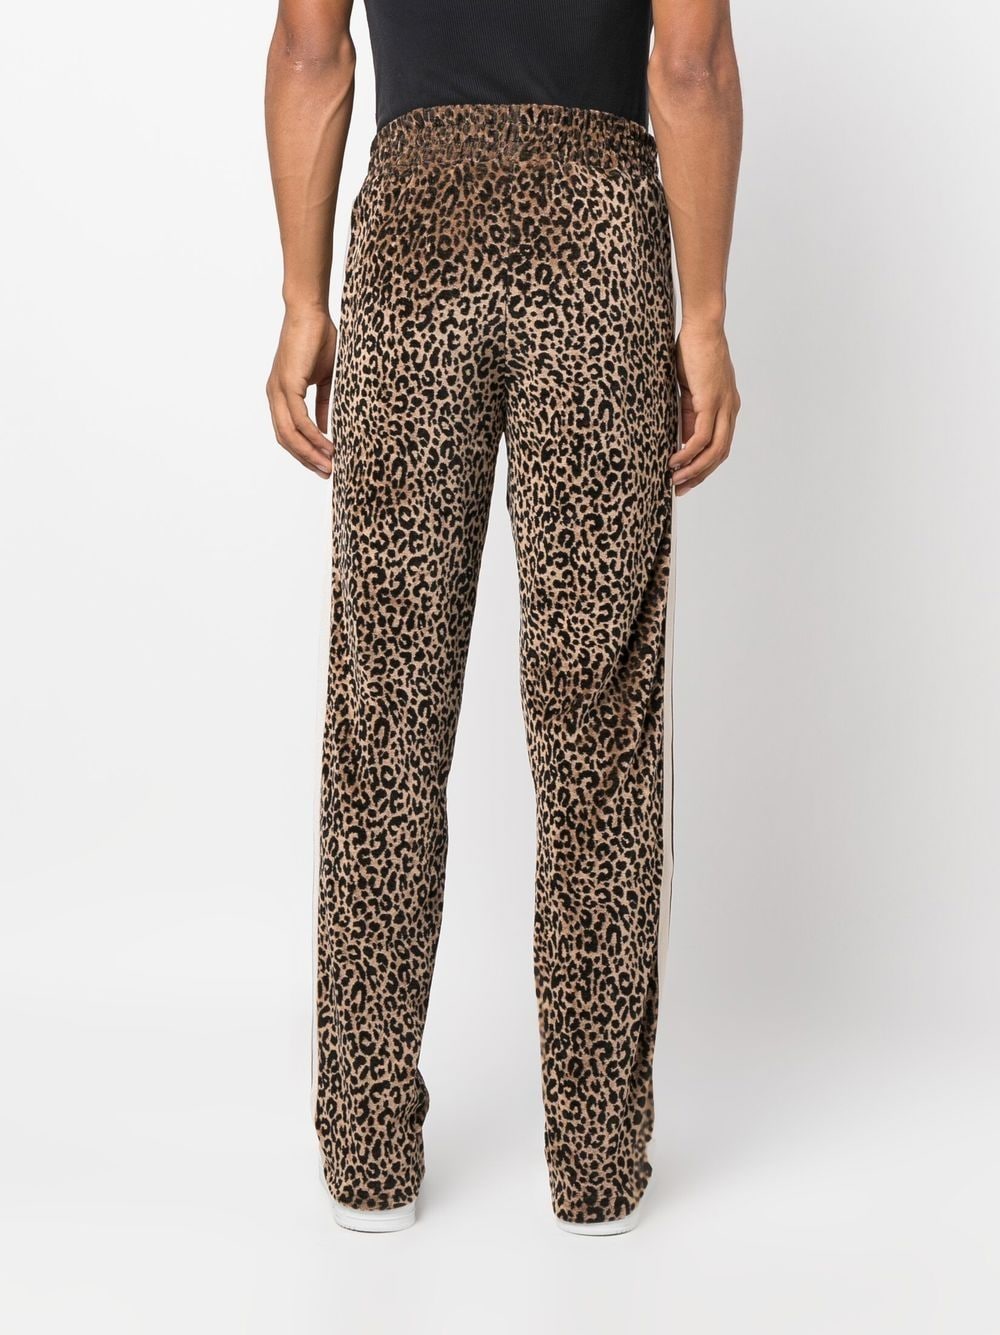 Buy Palm Angels Leopard-print Leggings - Multicoloured At 40% Off